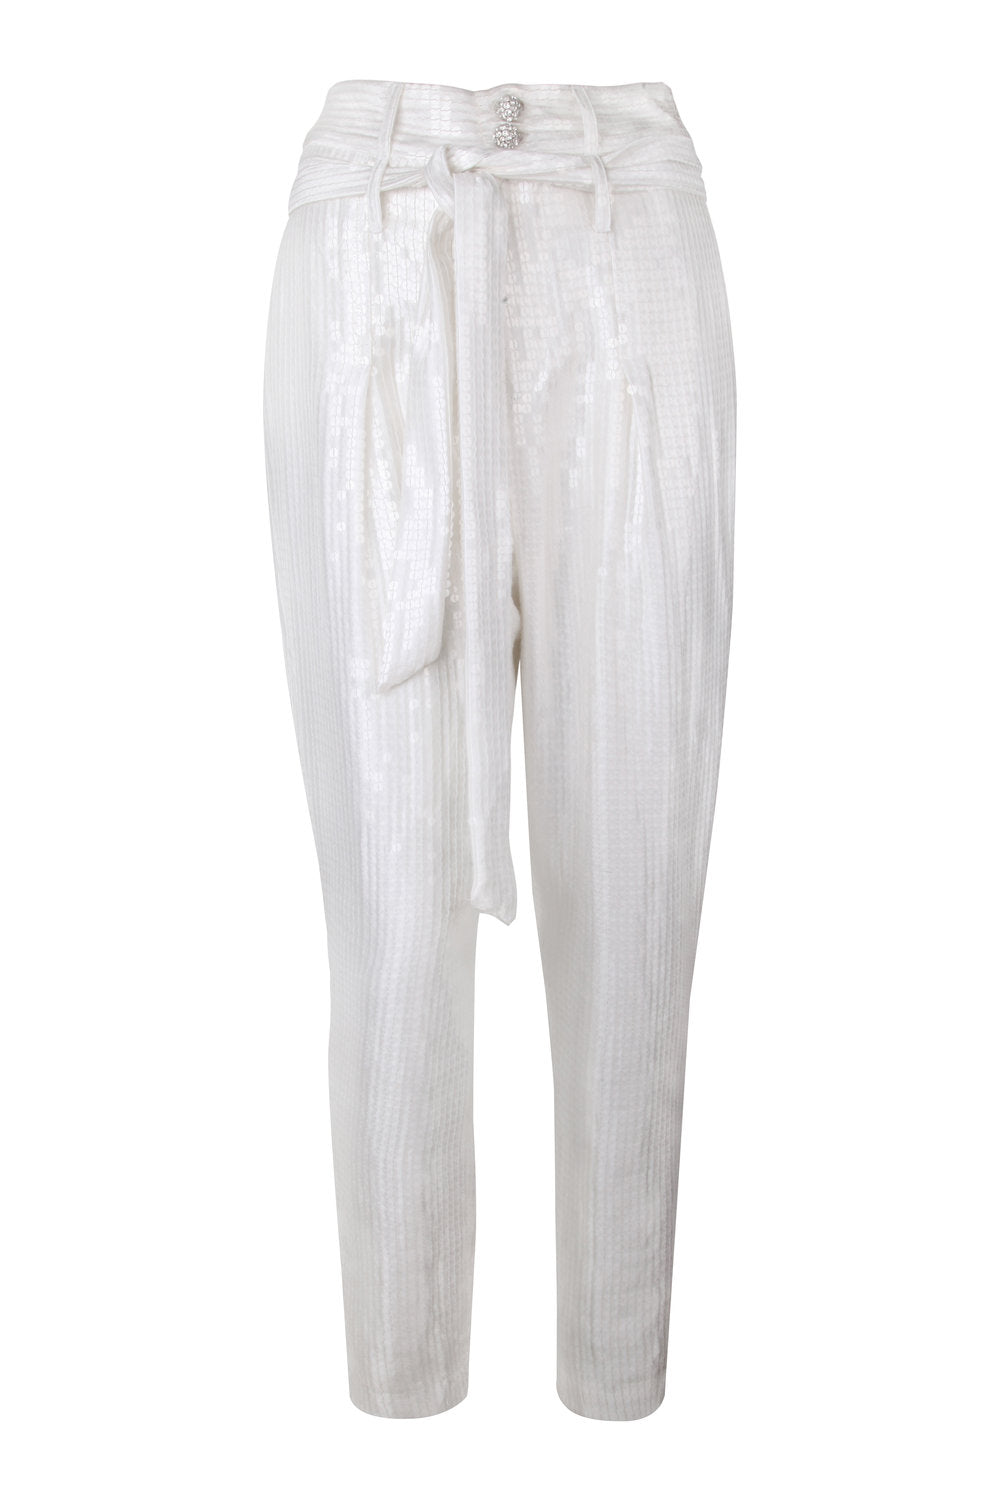 White Sequin High Waisted Tapered Pants